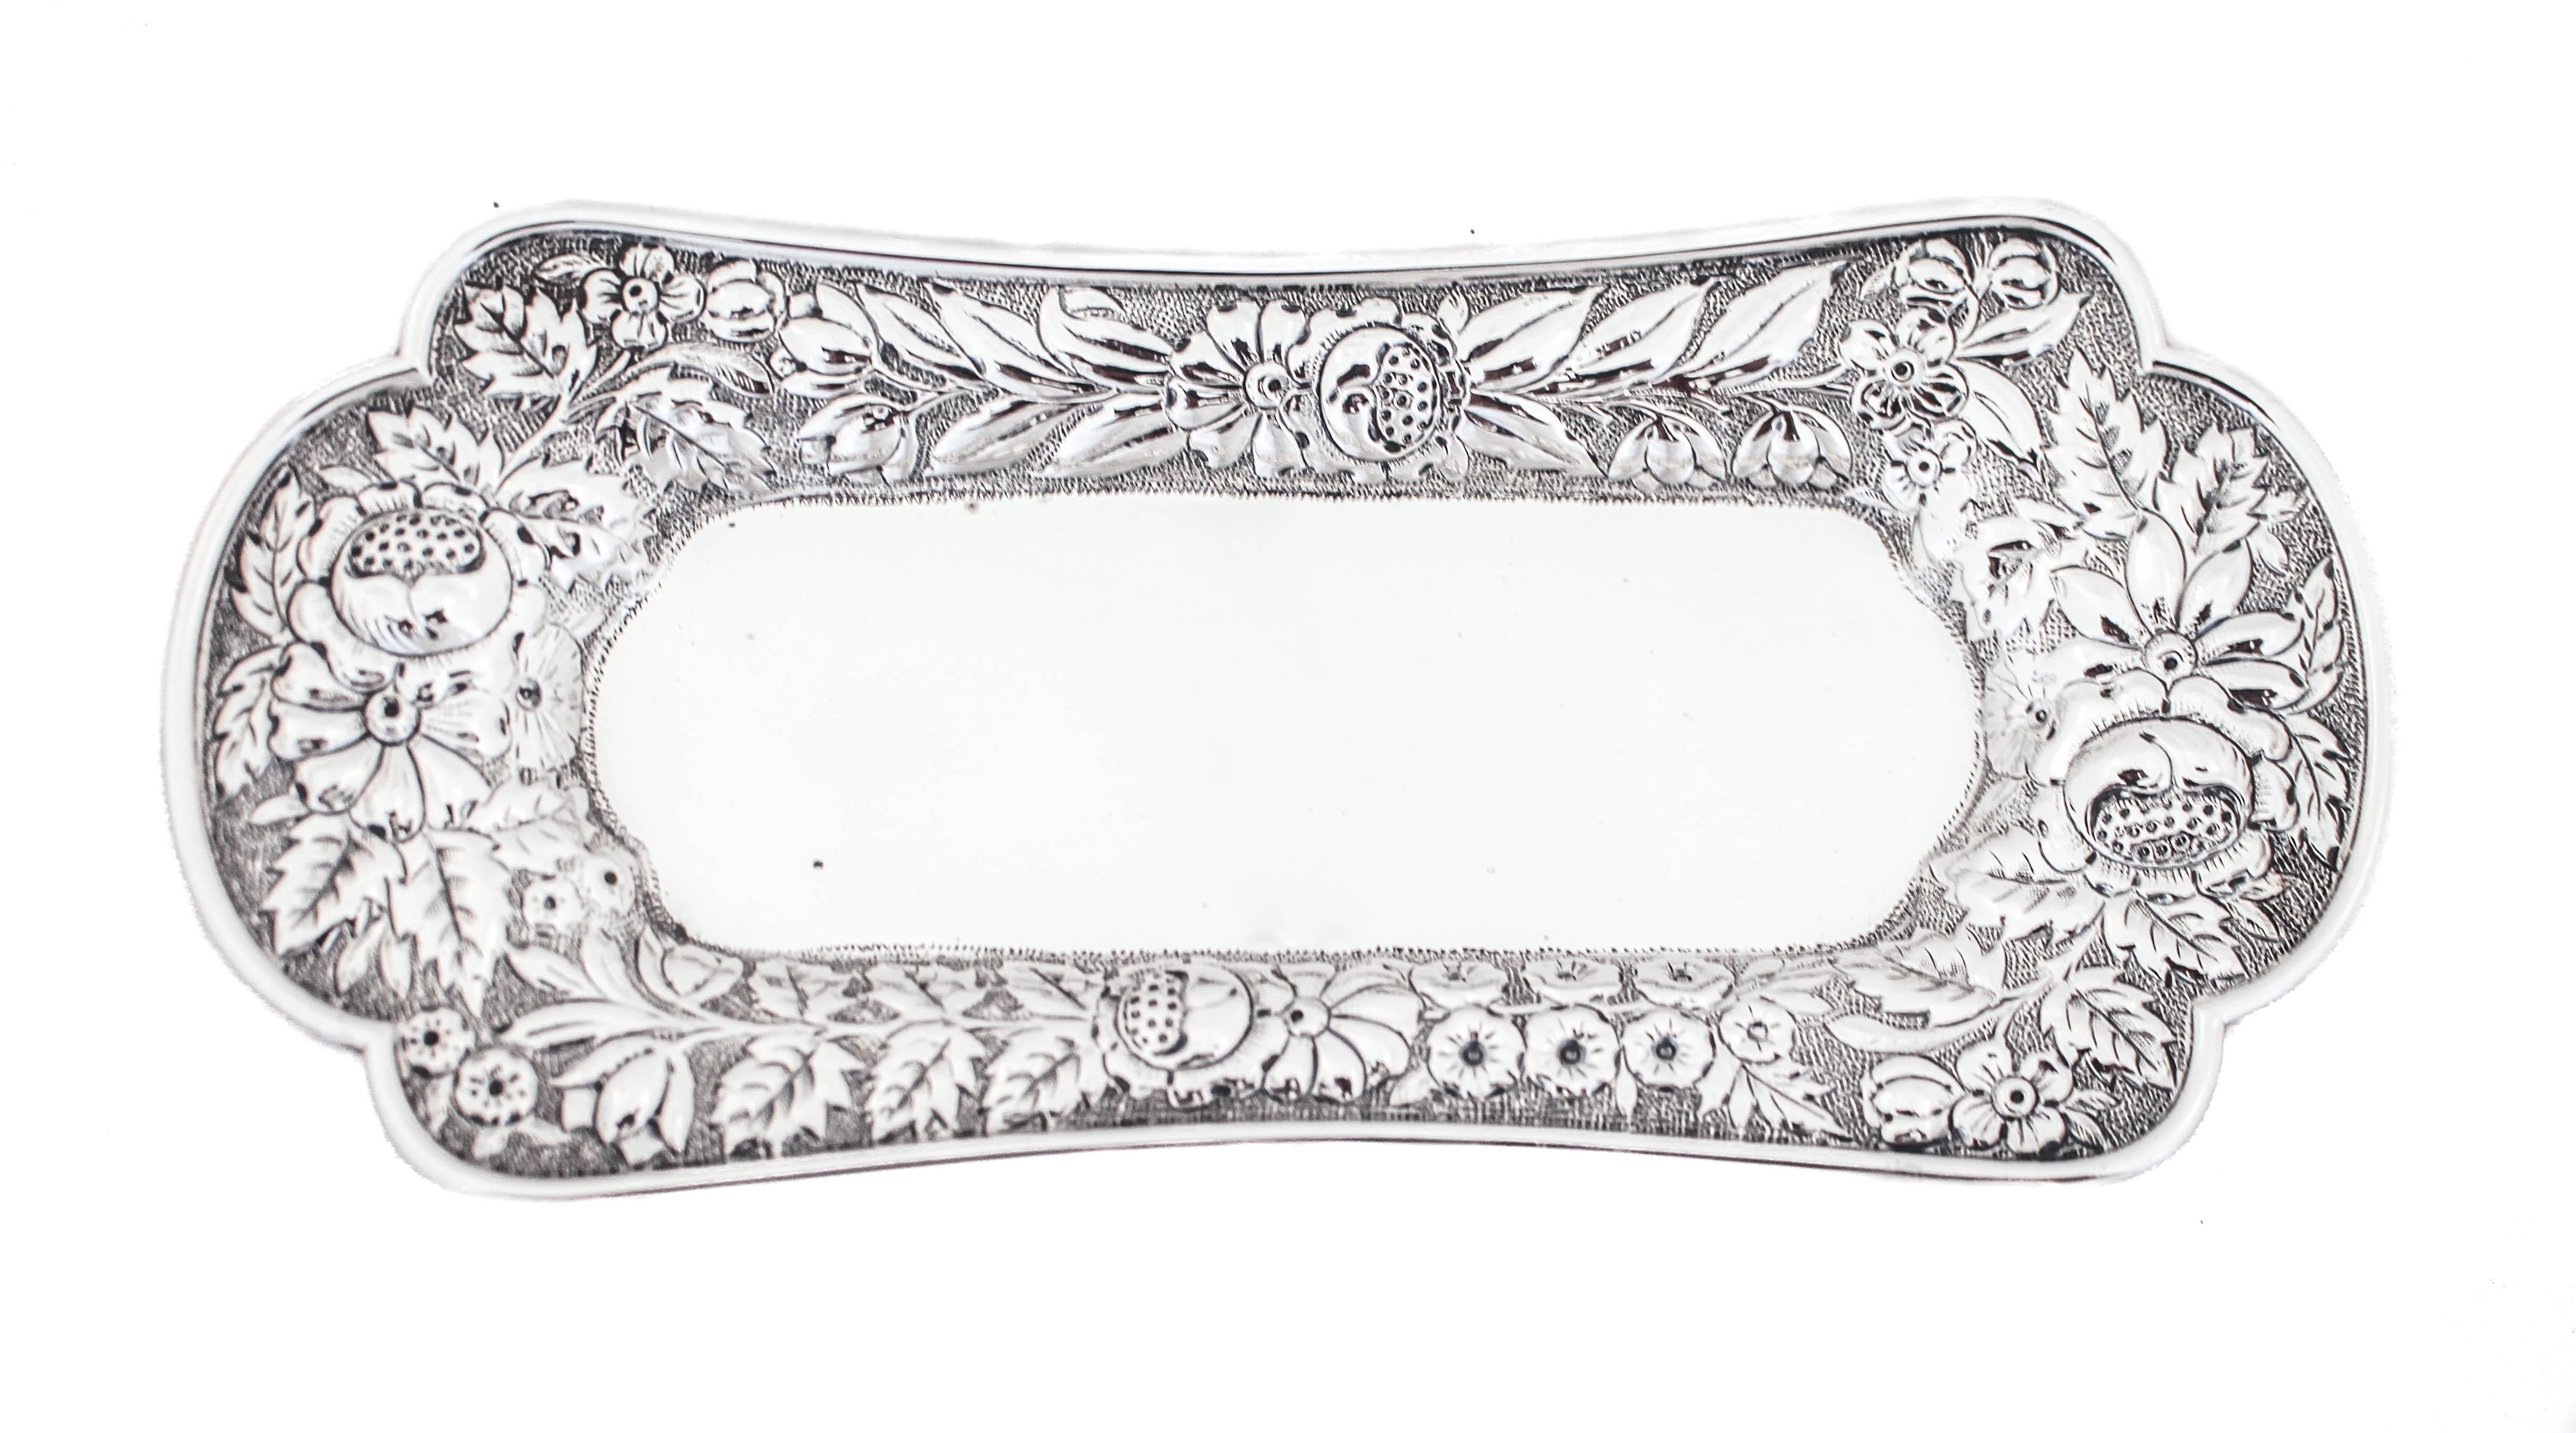 Being offered is a sterling silver antique ring tray hallmarked 1886.
It has a chased floral pattern around the edge and has a scalloped rim. The center is flat and when it’s filled you still see the beautiful work around the edge.  Perfect for